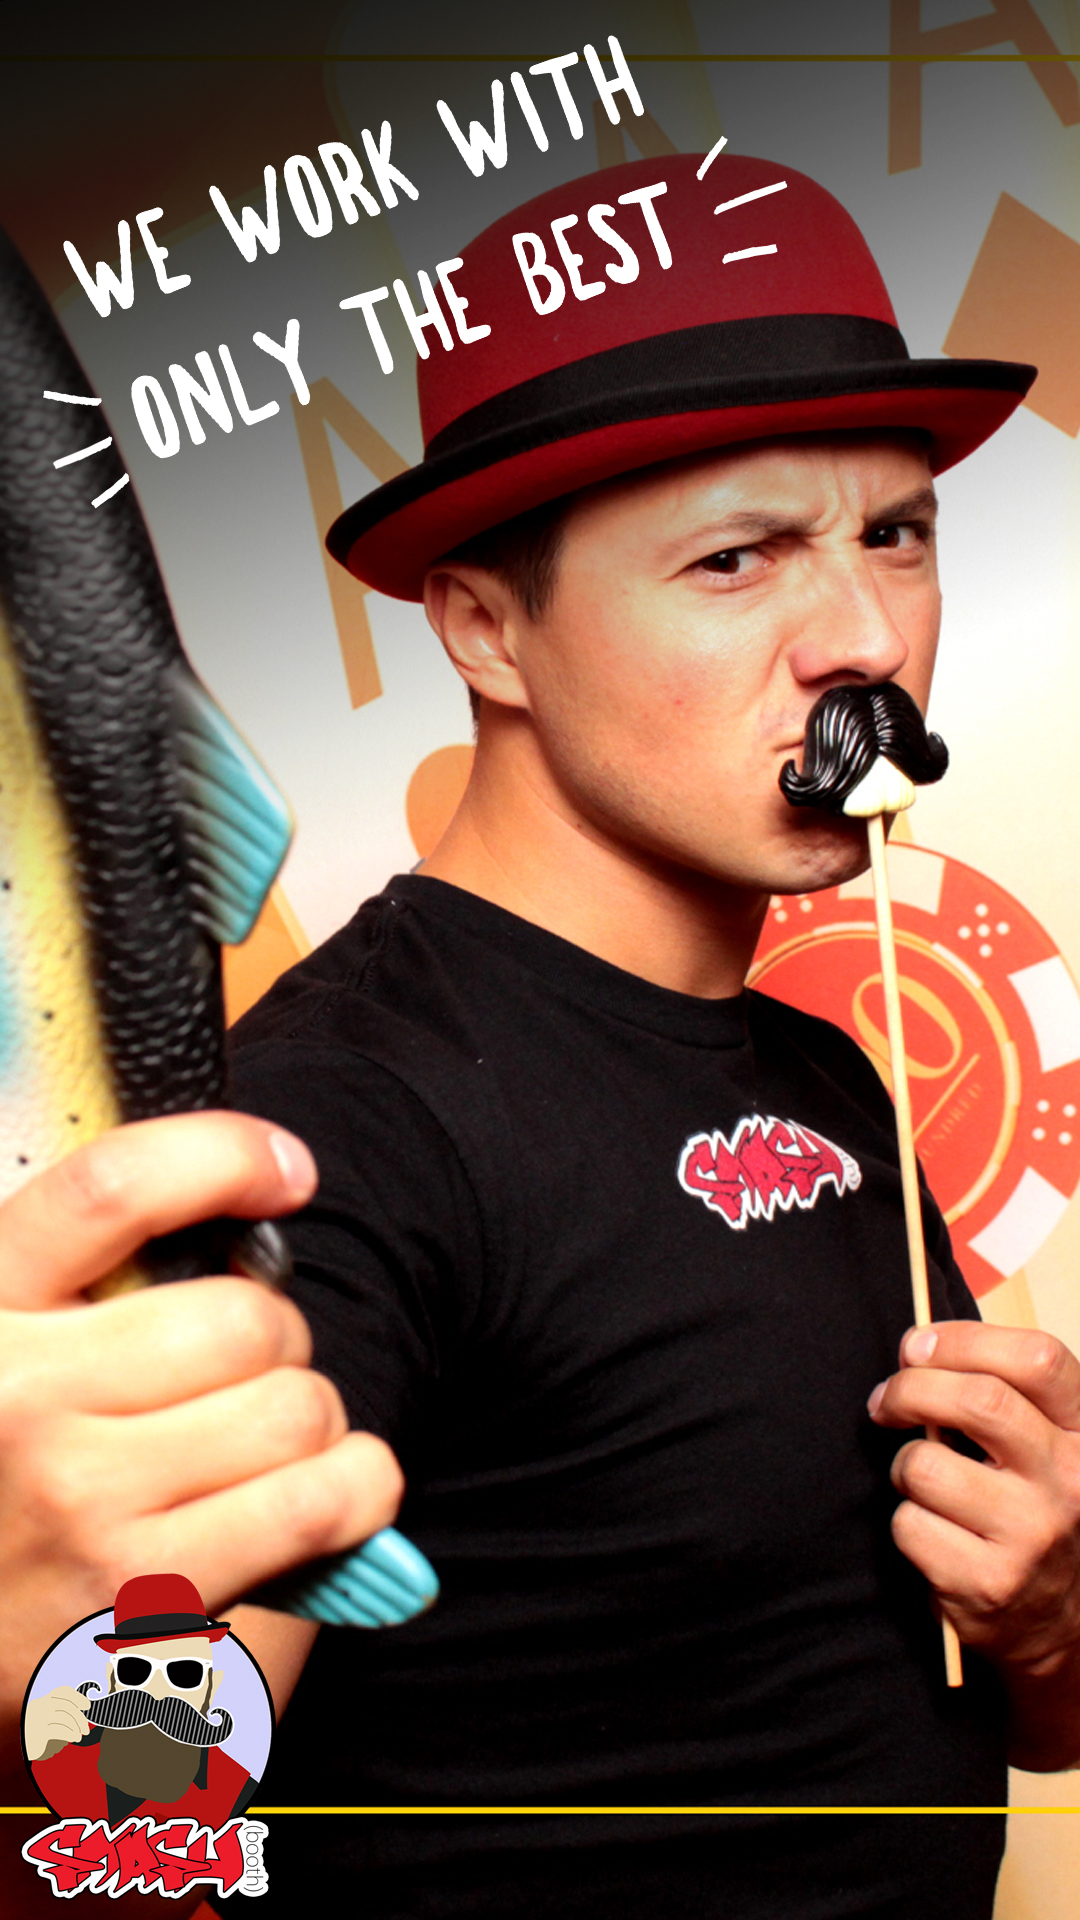 Smashbooth employee in red hat and vest with mustache prop